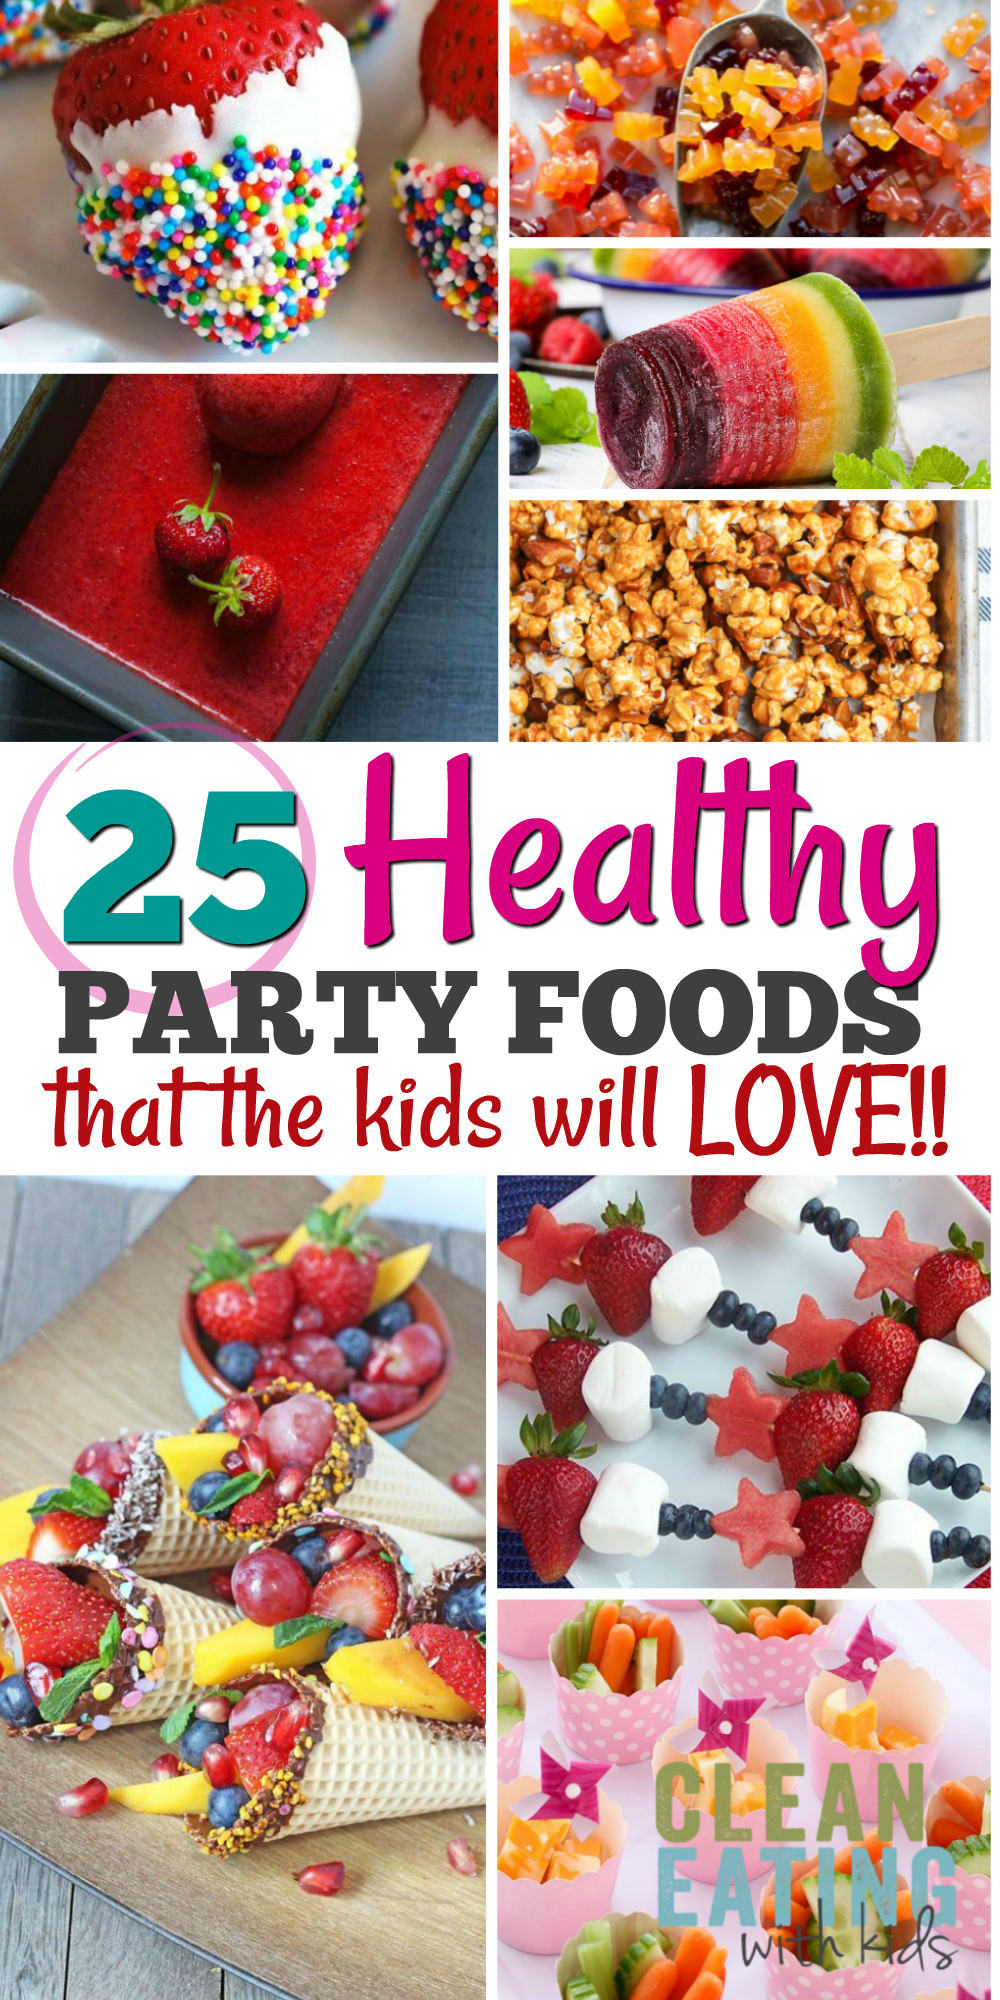 Party Food Ideas Pinterest
 25 Healthy Birthday Party Food Ideas Clean Eating with kids